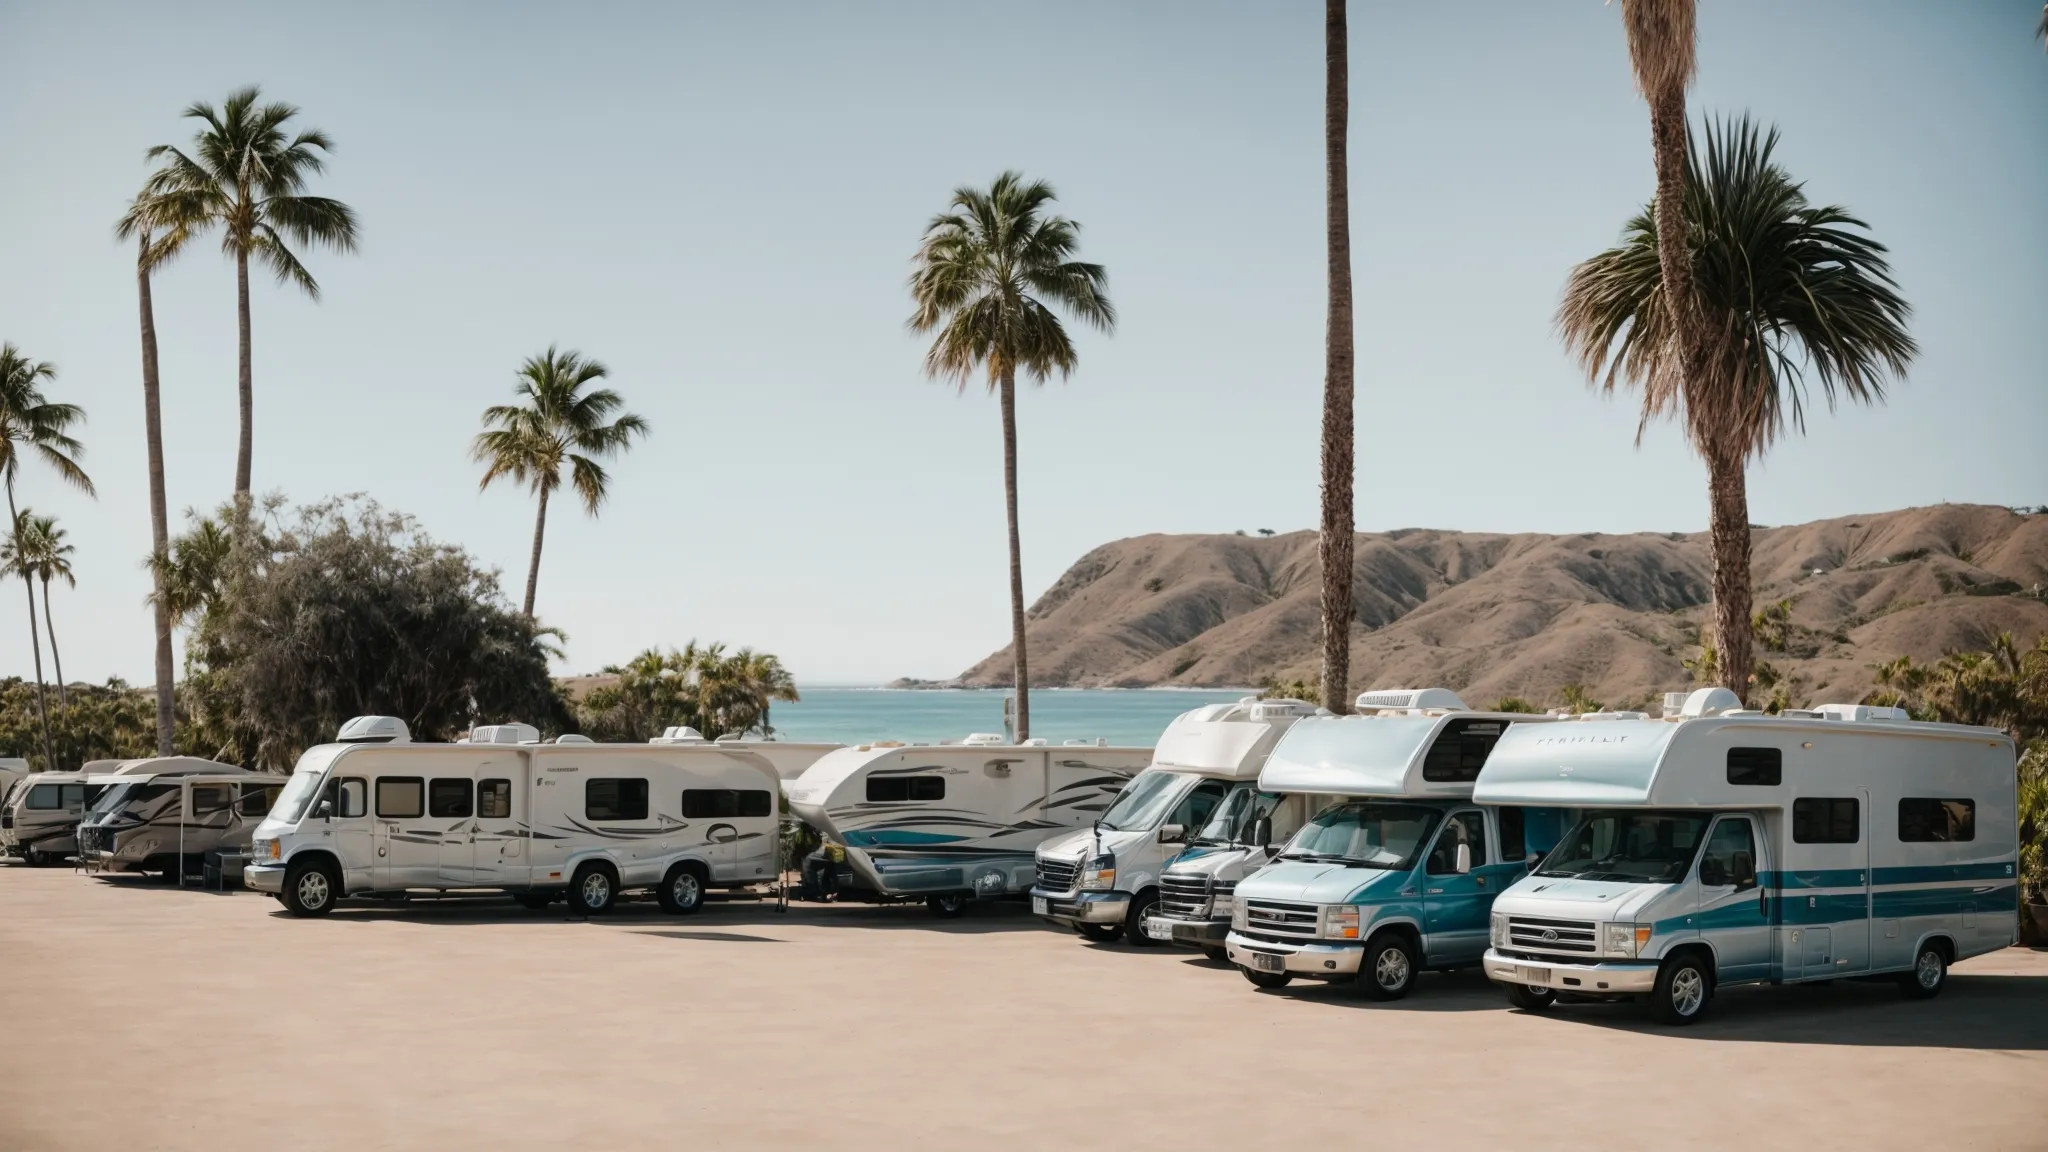 a lineup of recreational vehicles parked beside palm trees with views of the pacific ocean under a clear blue san diego sky.